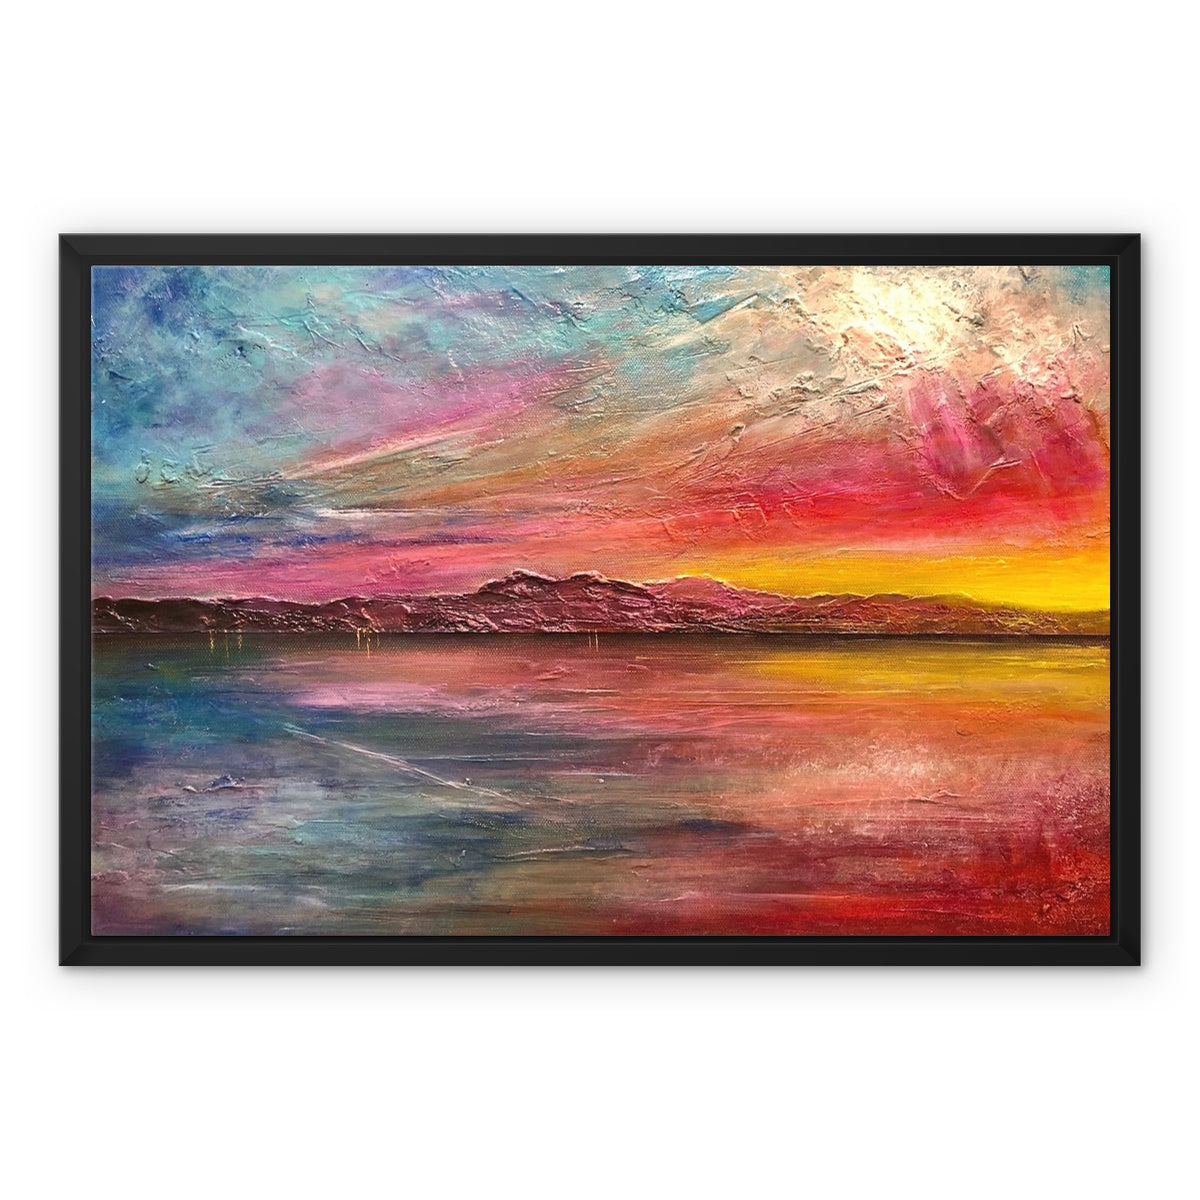 Arran Sunset ii Painting | Framed Canvas From Scotland-Floating Framed Canvas Prints-Arran Art Gallery-24"x18"-Black Frame-Paintings, Prints, Homeware, Art Gifts From Scotland By Scottish Artist Kevin Hunter